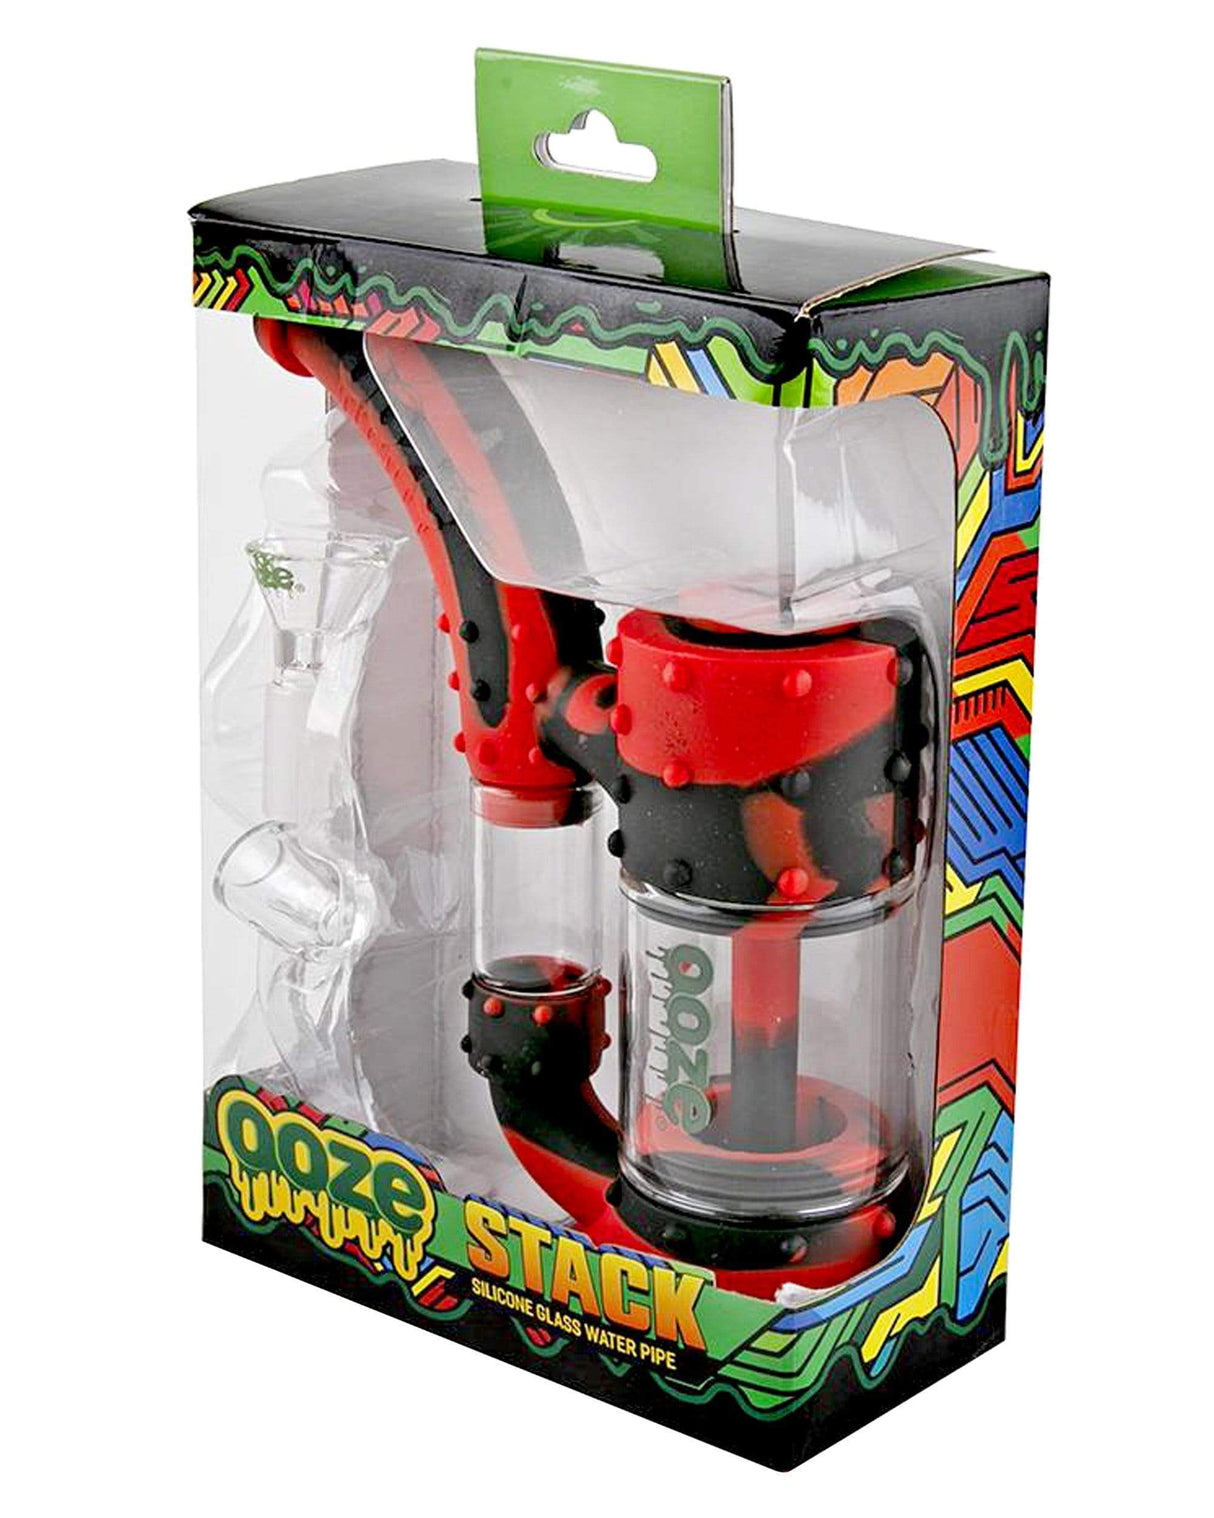 Ooze Stack Silicone Bubbler in packaging, red and black design, for dry herbs and concentrates